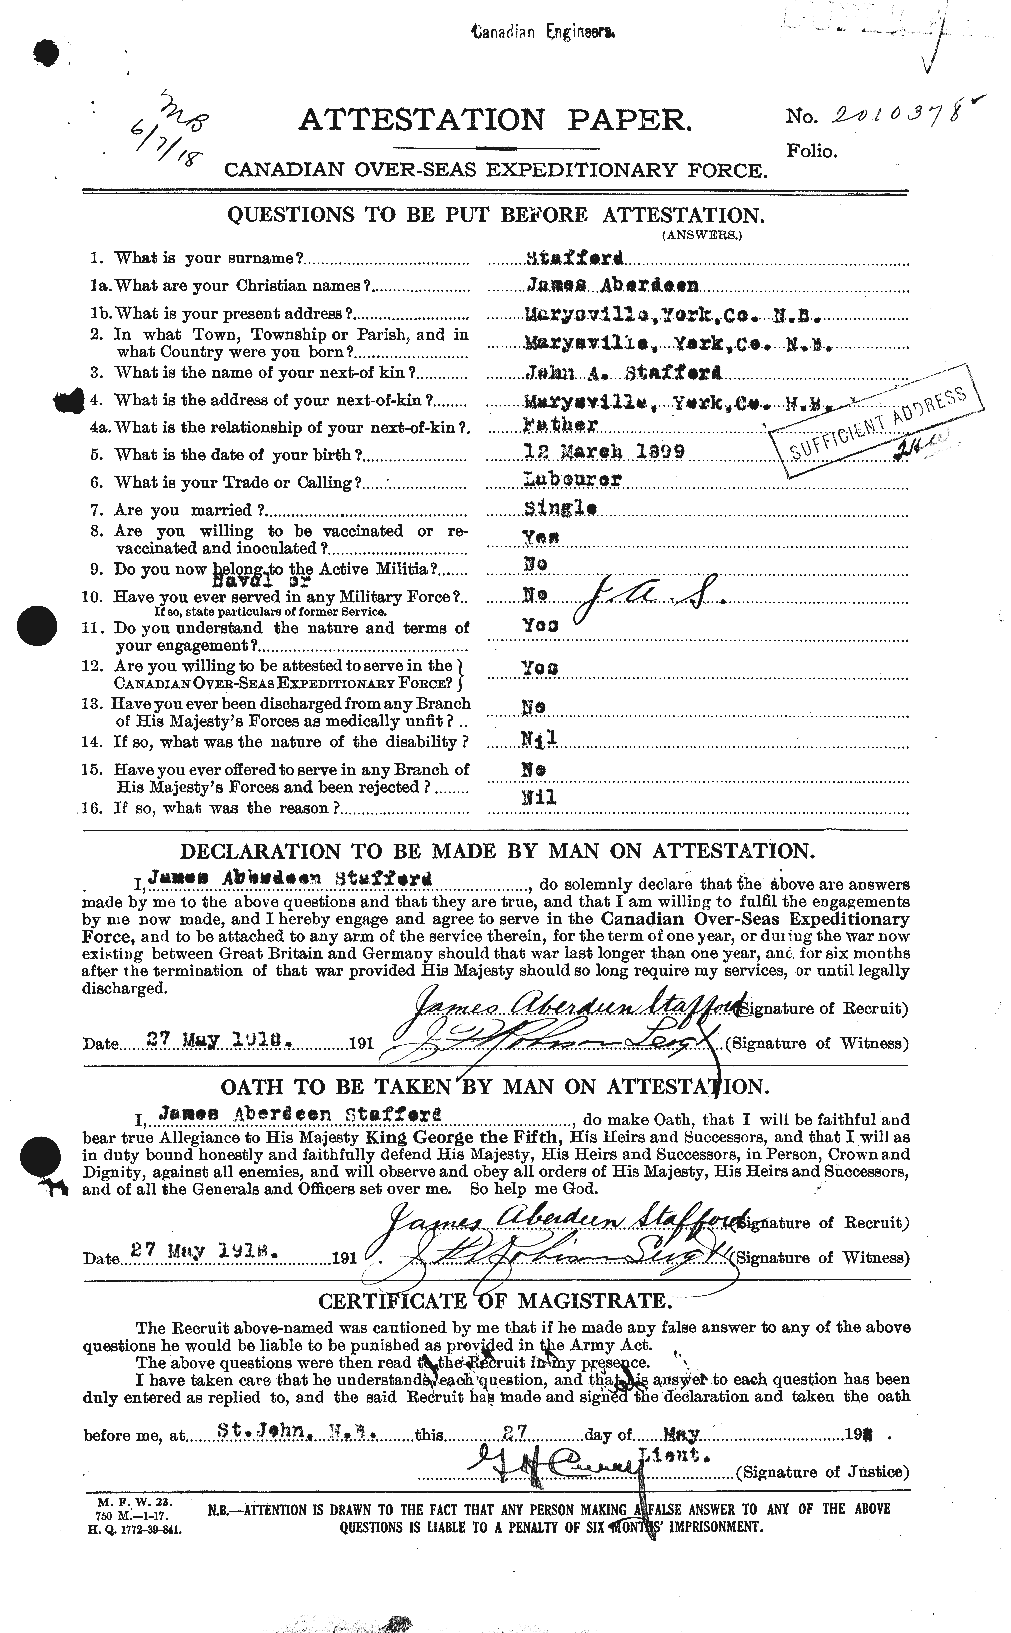 Personnel Records of the First World War - CEF 113266a